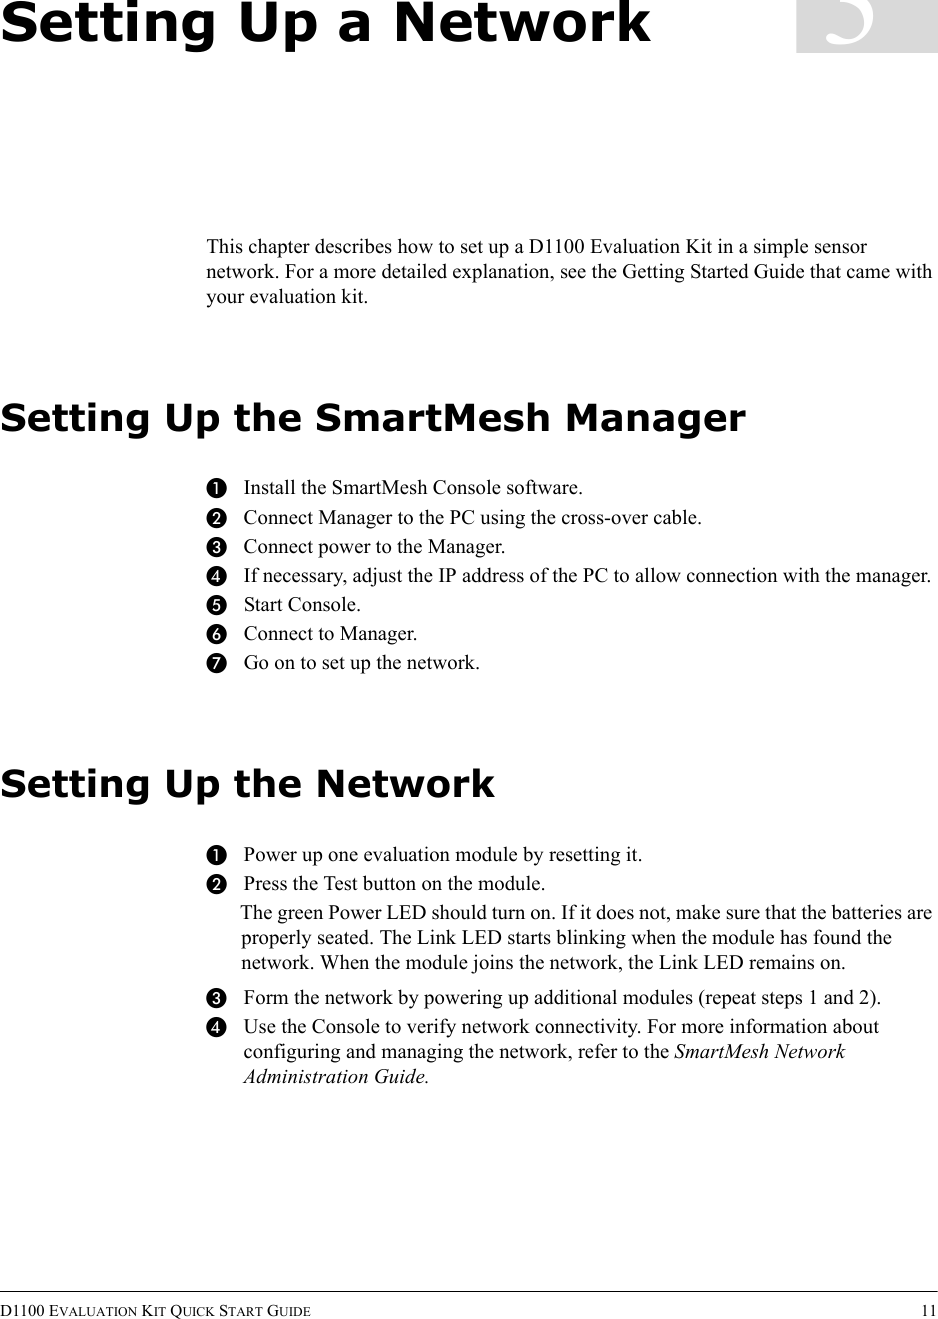 D1100 EVALUATION KIT QUICK START GUIDE 113Setting Up a NetworkThis chapter describes how to set up a D1100 Evaluation Kit in a simple sensor network. For a more detailed explanation, see the Getting Started Guide that came with your evaluation kit.Setting Up the SmartMesh ManagerAInstall the SmartMesh Console software.BConnect Manager to the PC using the cross-over cable.CConnect power to the Manager.DIf necessary, adjust the IP address of the PC to allow connection with the manager.EStart Console.FConnect to Manager.GGo on to set up the network.Setting Up the NetworkAPower up one evaluation module by resetting it.BPress the Test button on the module.The green Power LED should turn on. If it does not, make sure that the batteries are properly seated. The Link LED starts blinking when the module has found the network. When the module joins the network, the Link LED remains on.CForm the network by powering up additional modules (repeat steps 1 and 2).DUse the Console to verify network connectivity. For more information about configuring and managing the network, refer to the SmartMesh Network Administration Guide.